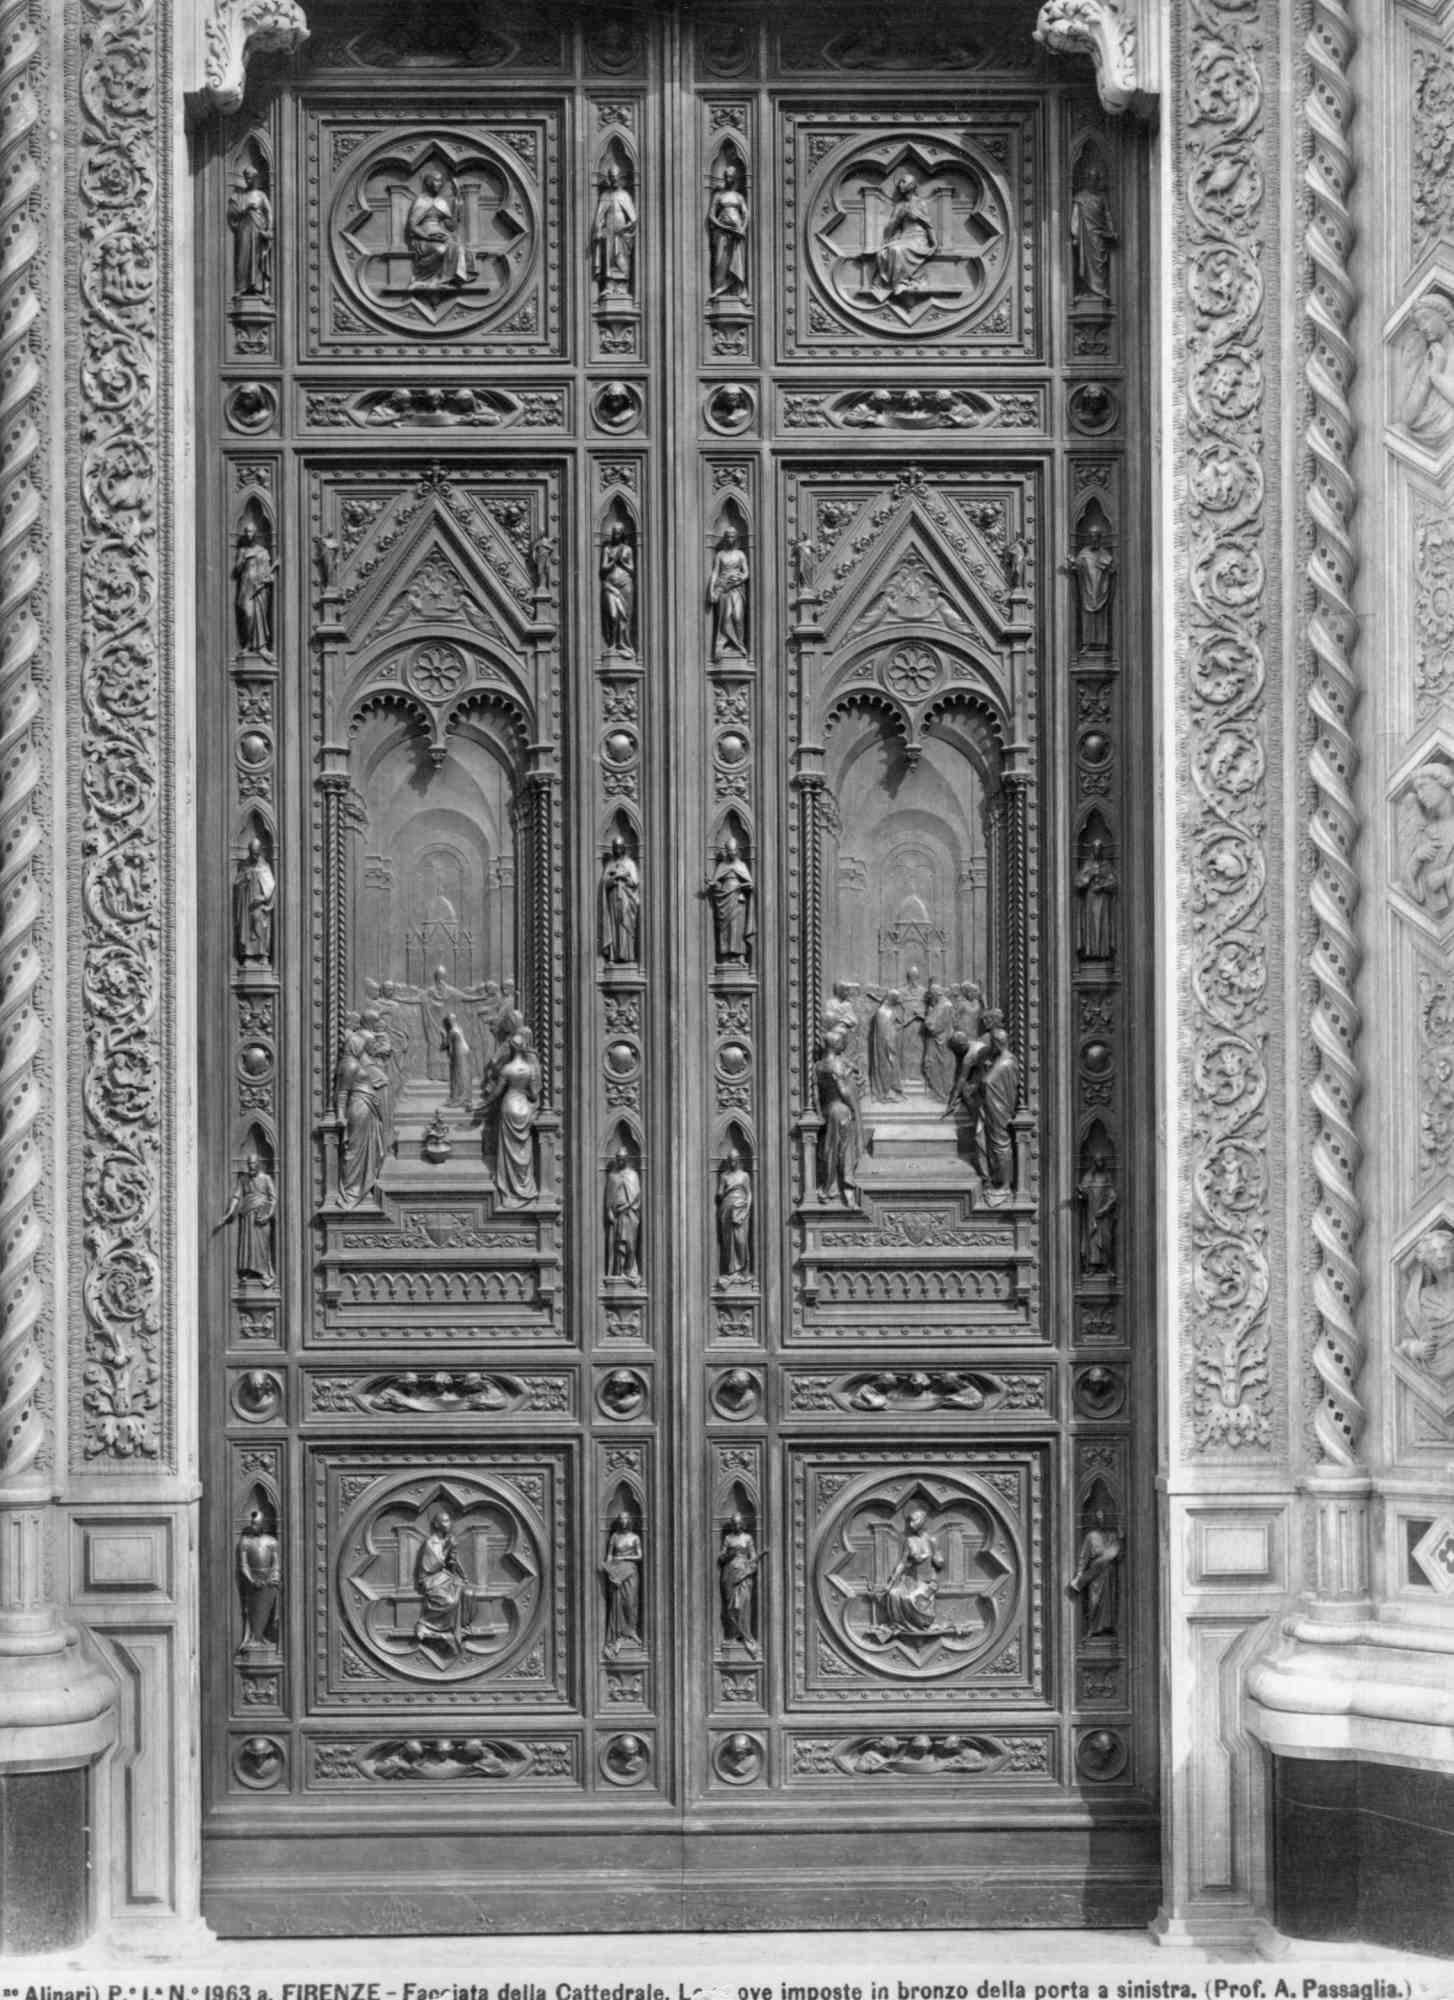 Unknown Figurative Photograph - The Door of The Cathedral of Florence - Vintage Photograph - Early 20th Century